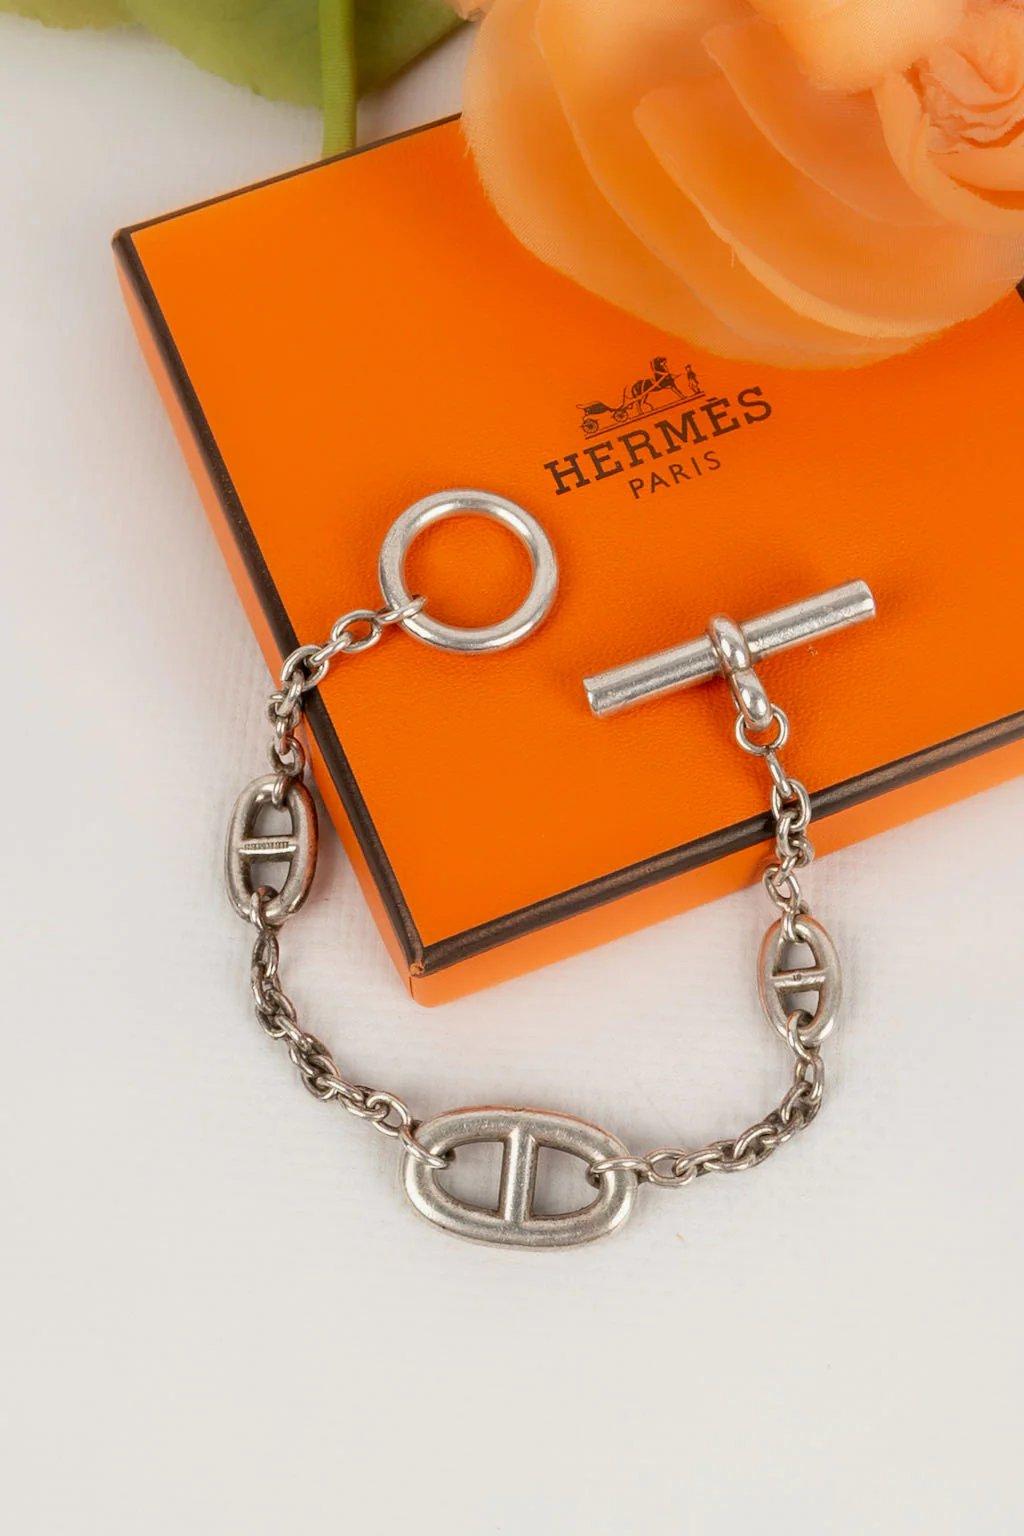 Hermes -(Made in France) Silver bracelet Farandole model.

Additional information:

Dimensions: 
Length: 18 cm

Condition: Very good condition

Seller Ref number: BRA32